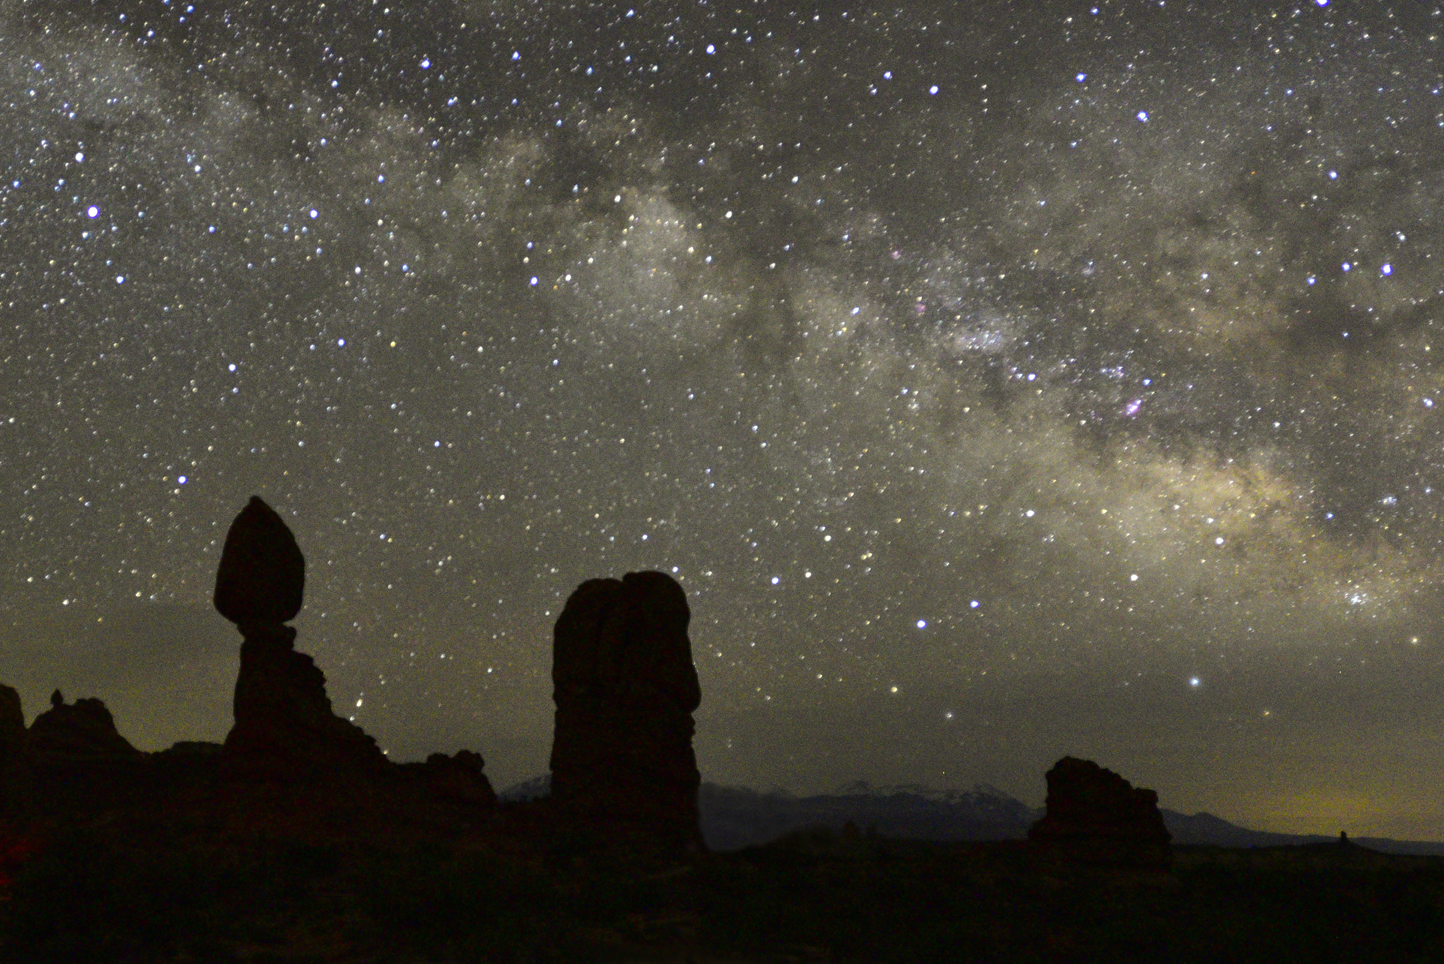 Milky Way Galactic Core  -  from Balanced Rock Parking Area, Arches National Park, Utah